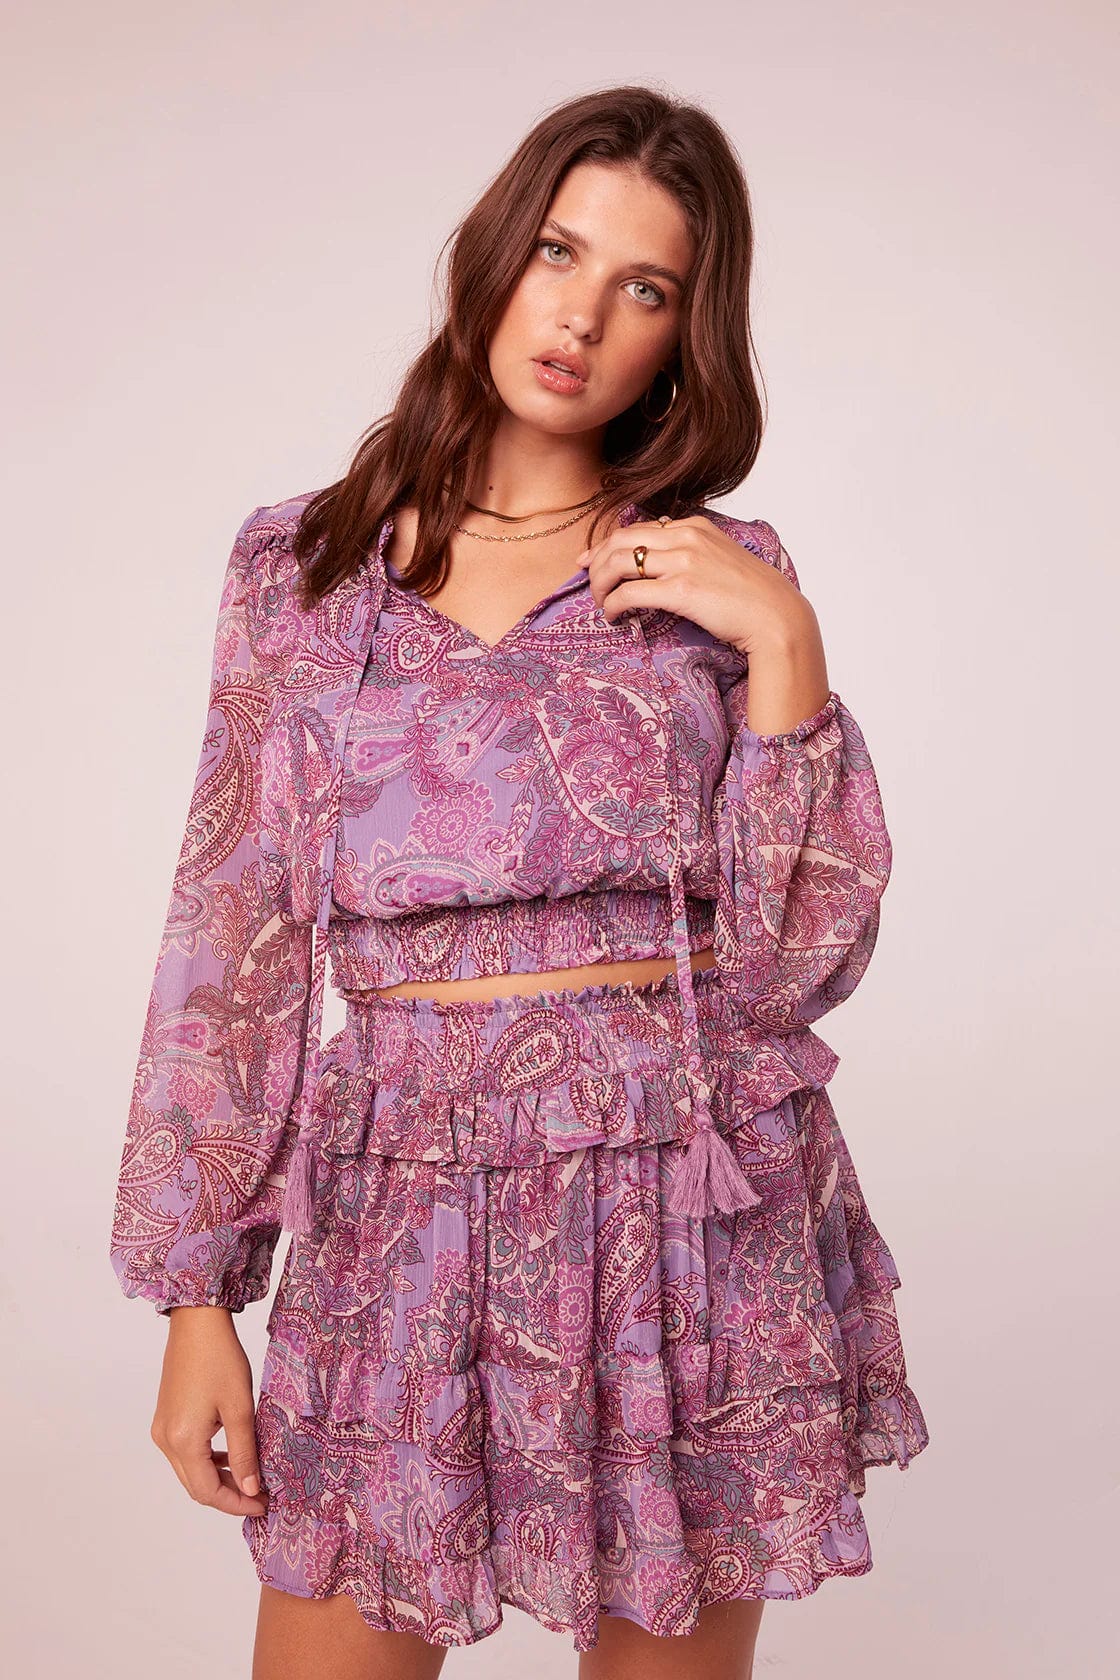 Band Of The Free Shyla Long Sleeve Lavender Paisley Chiffon Top - Women's Shirts & Tops - Blooming Daily